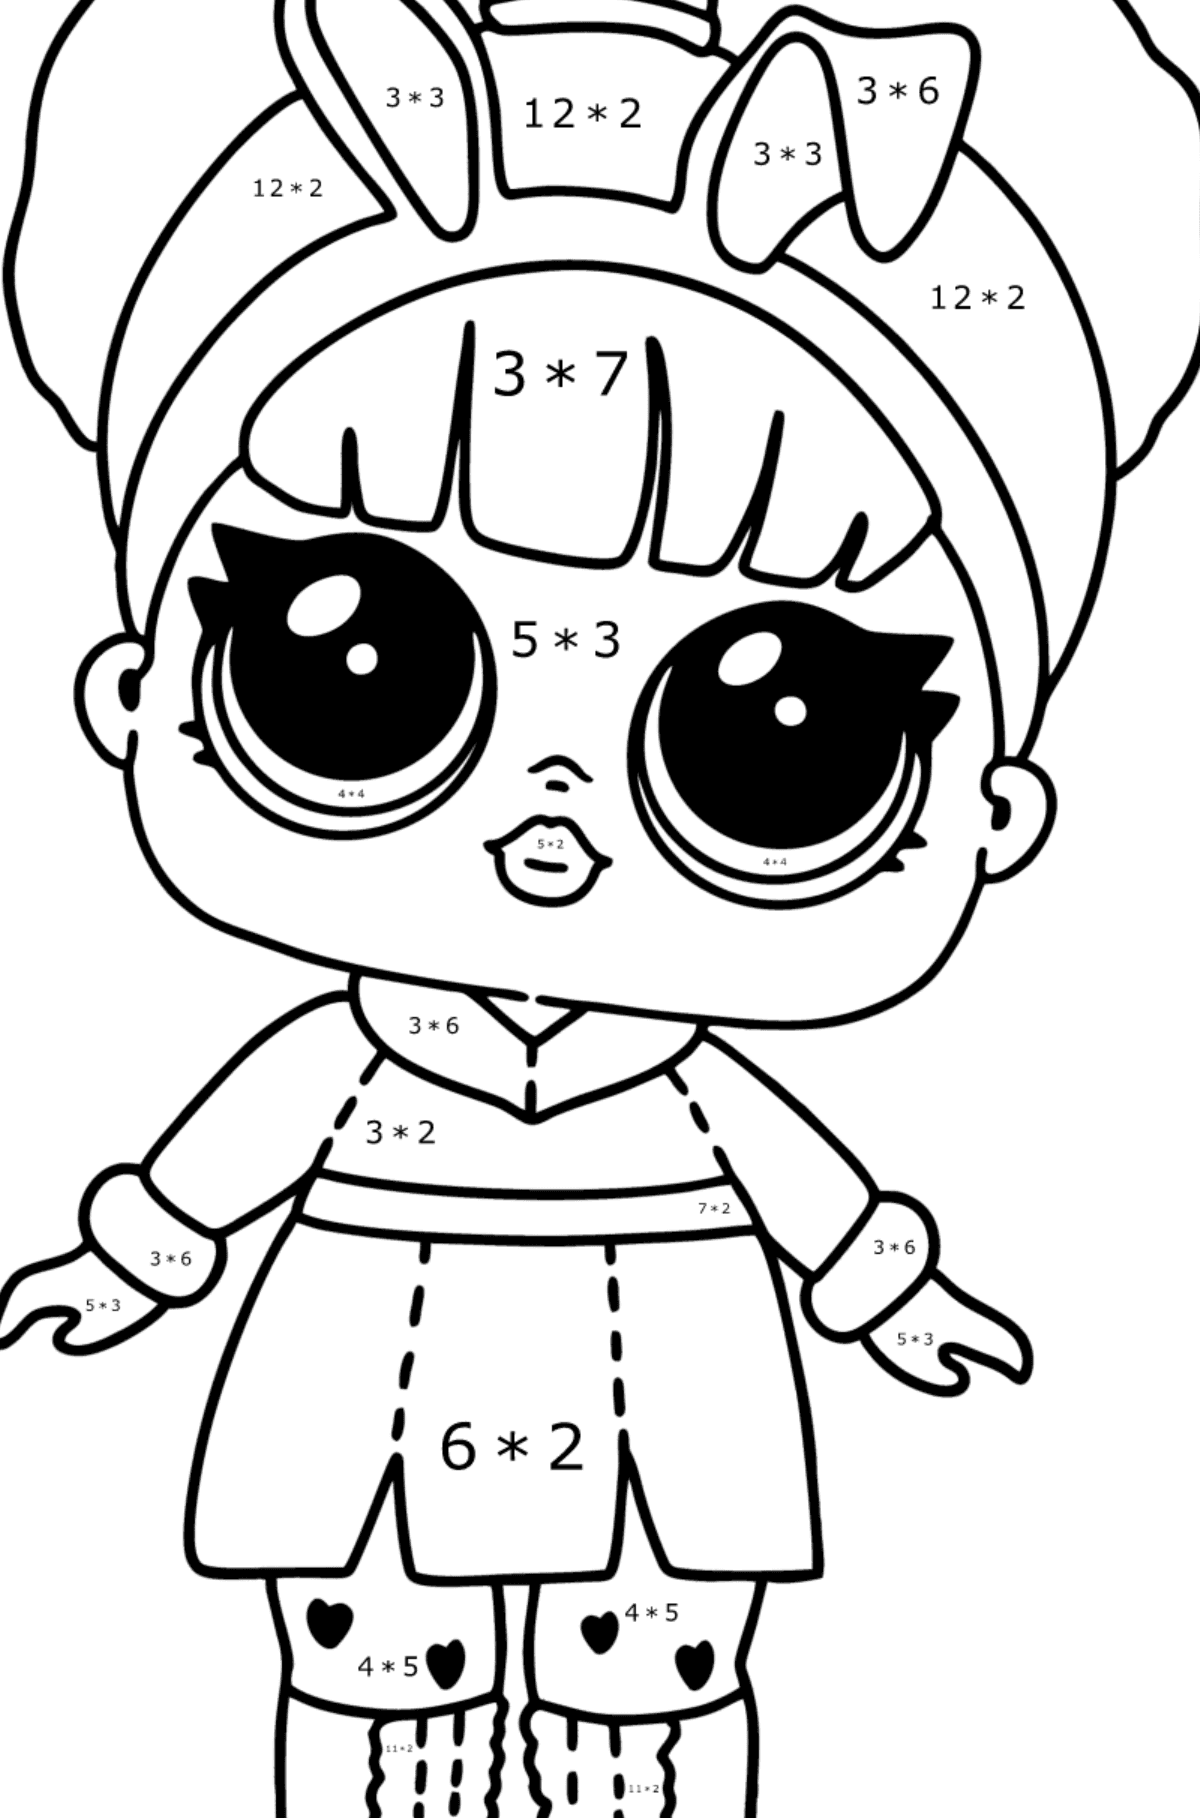 LOL Surprise Snow bunny coloring page - Math Coloring - Multiplication for Kids